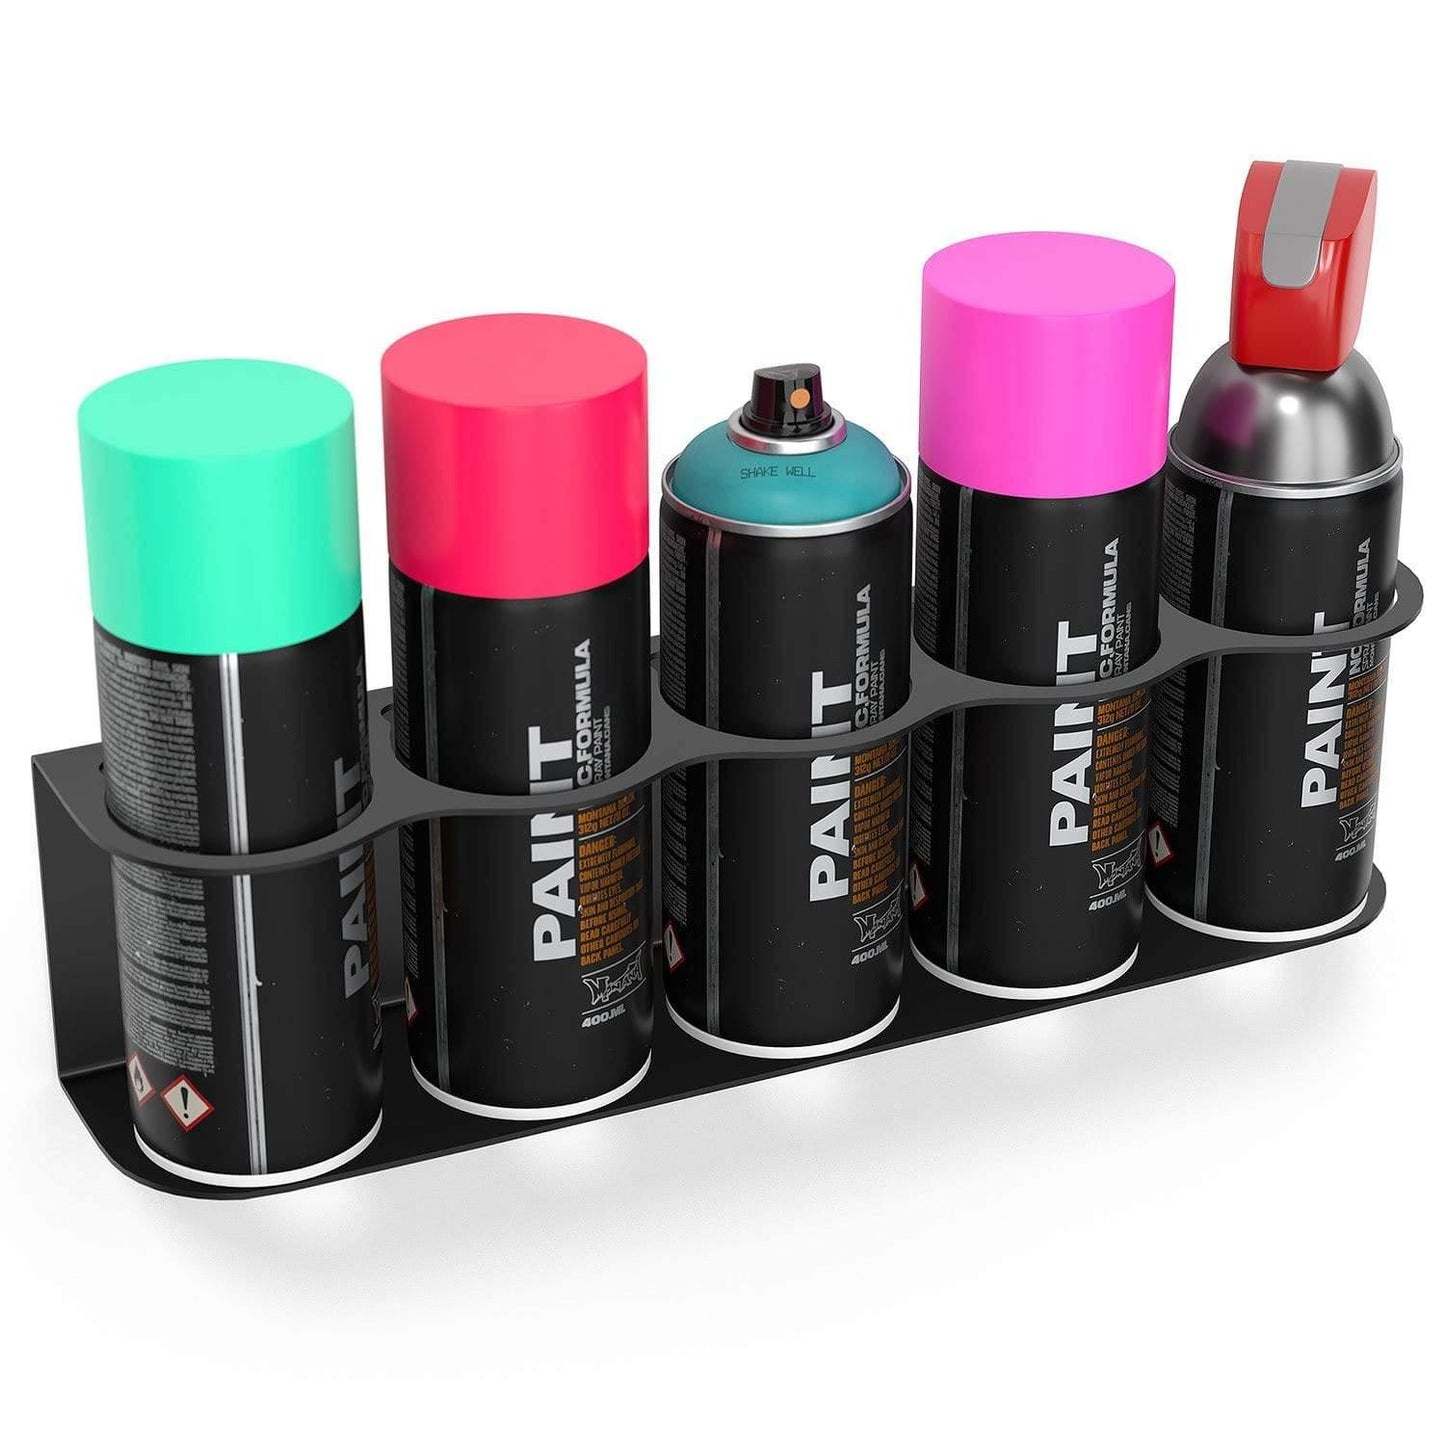 Store up to 5 aerosol spray cans with the Koova wall mounted spray can holder